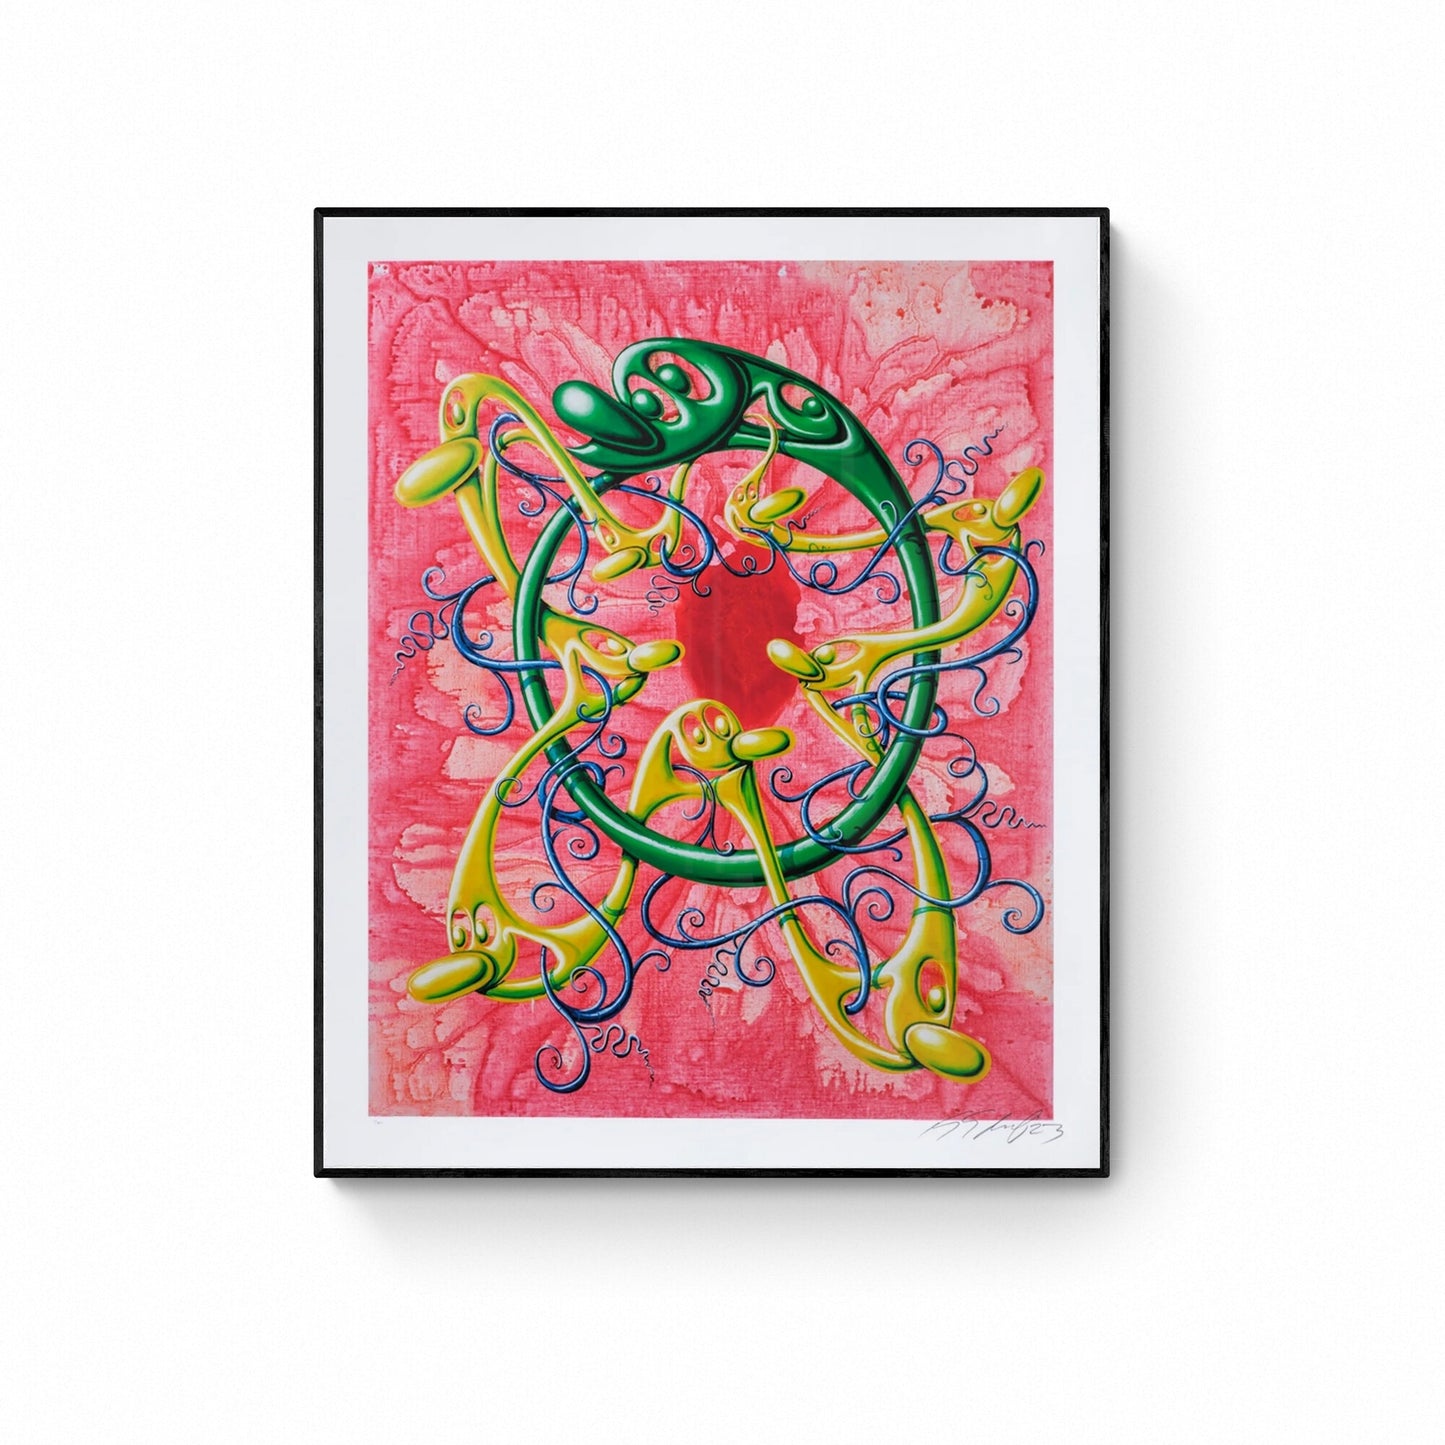 Kenny Scharf, Vring, Lithograph